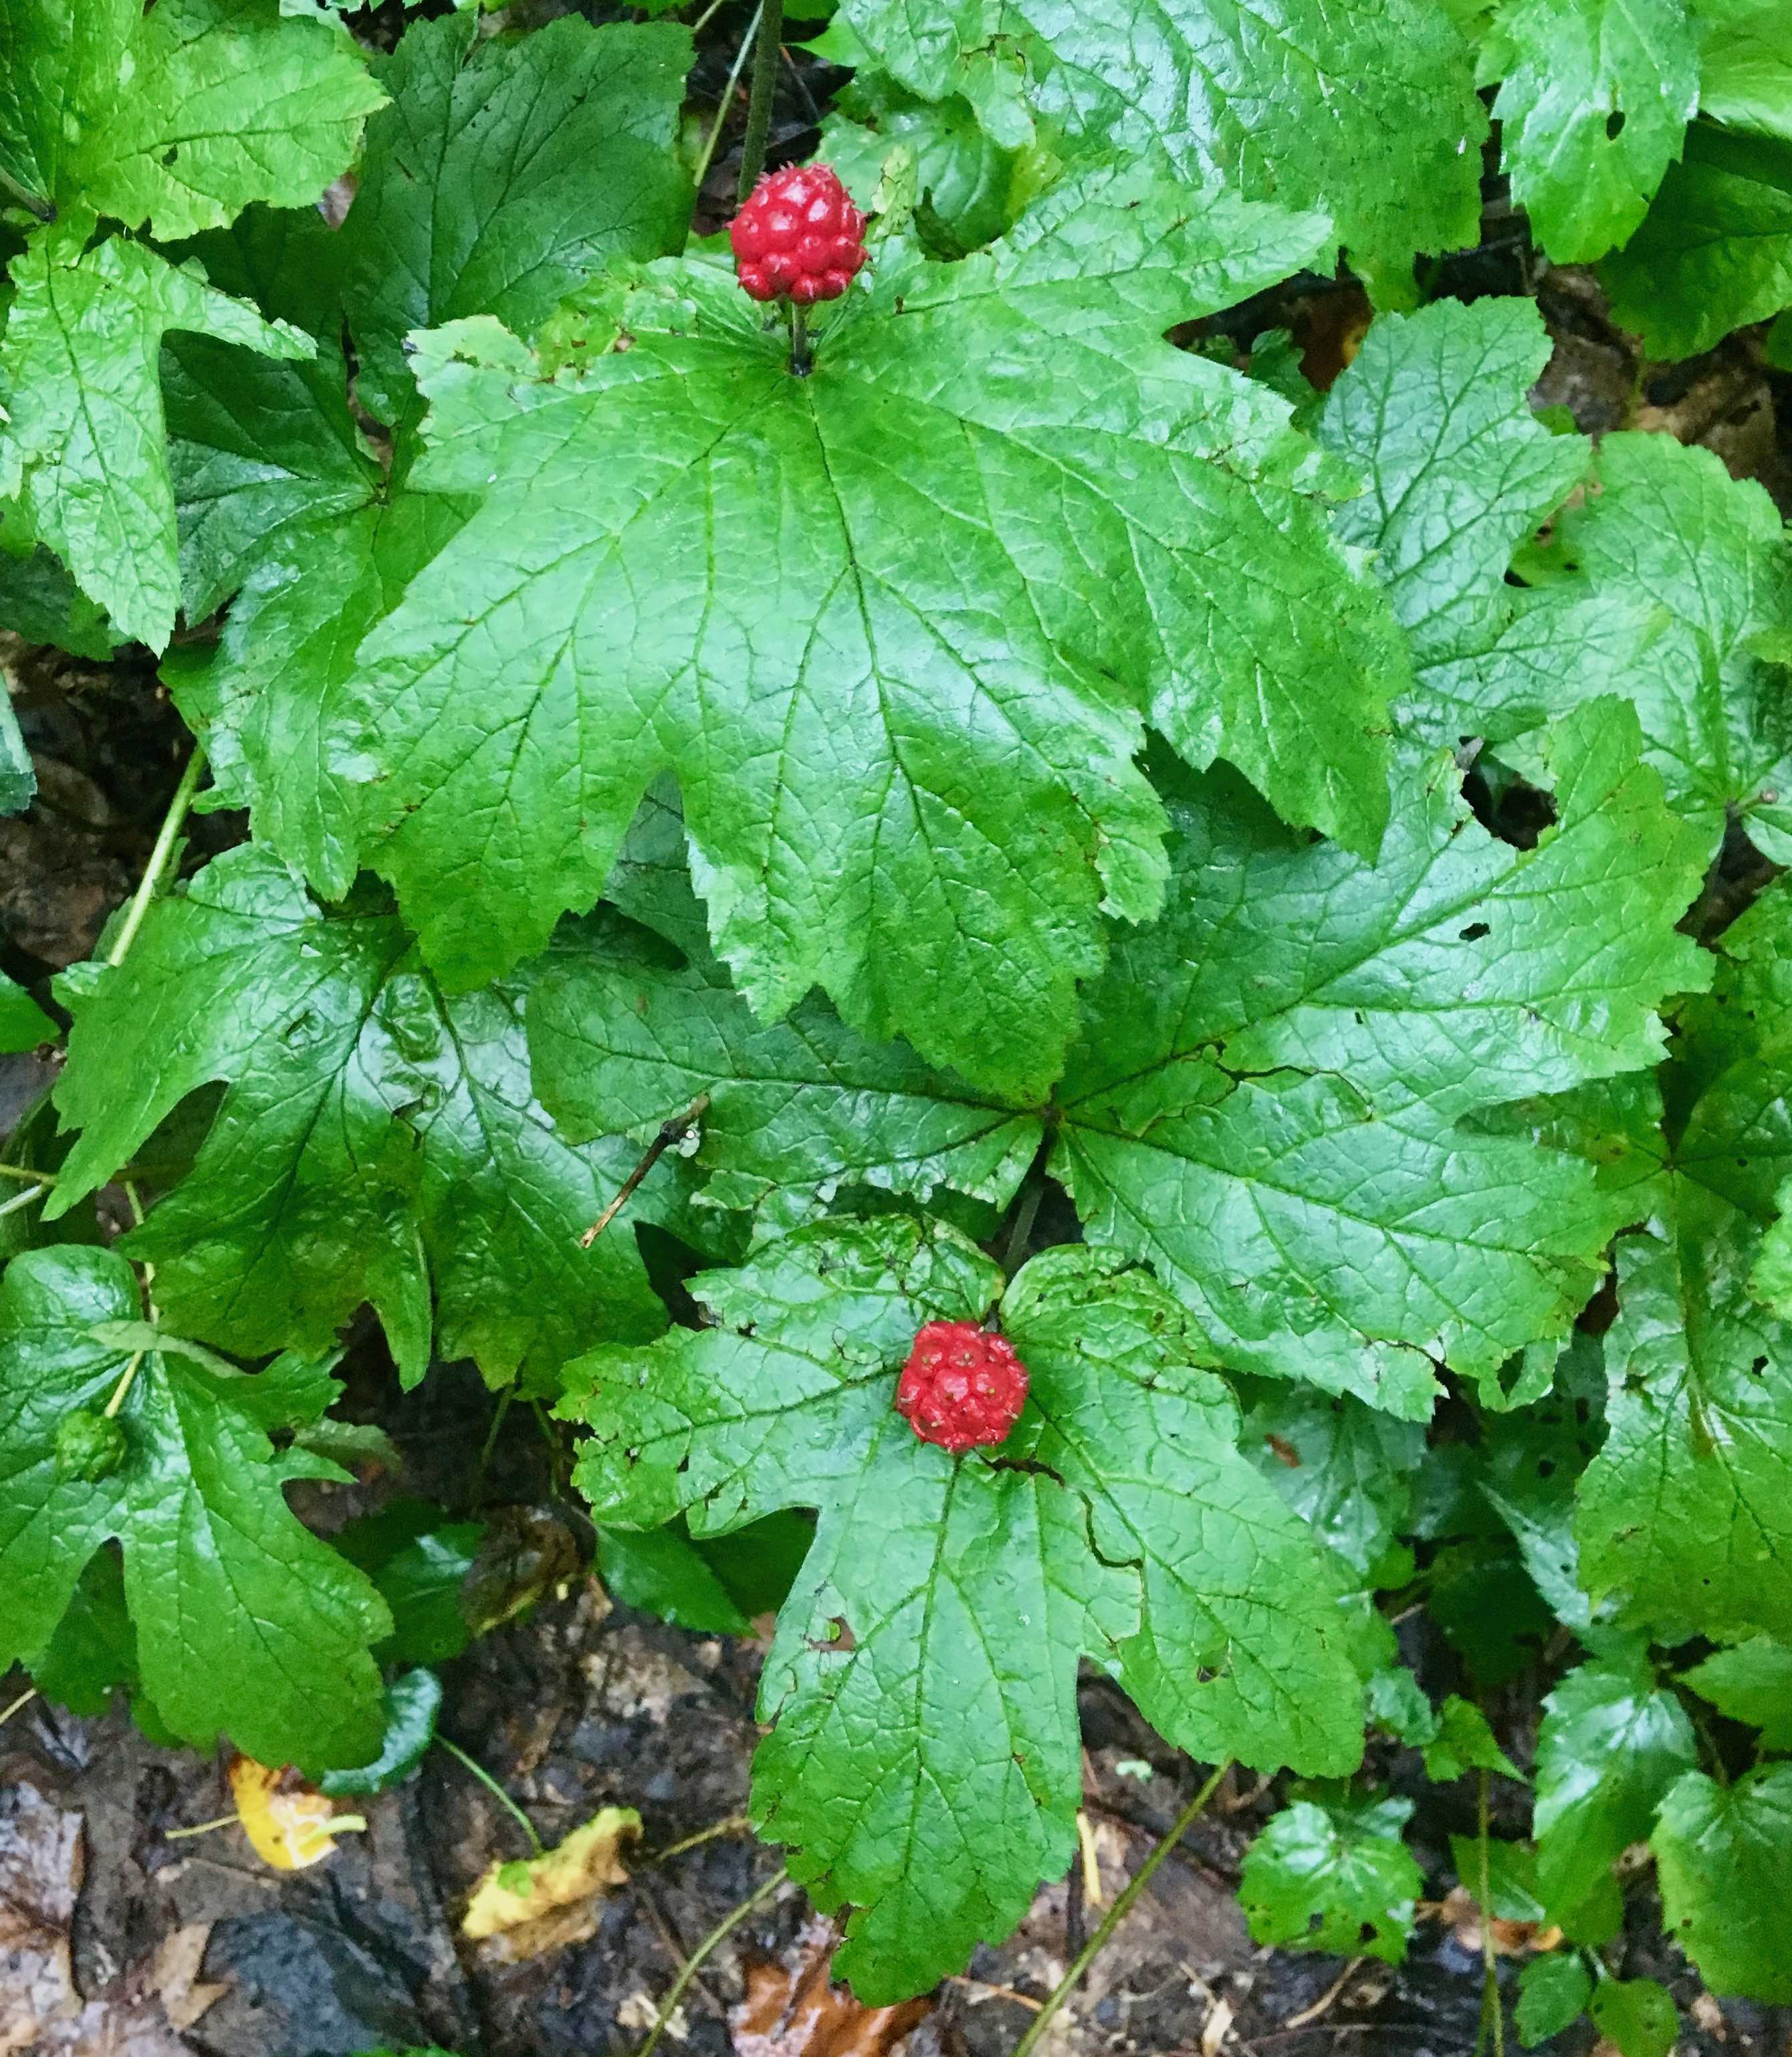 The Scientific Name is Hydrastis canadensis. You will likely hear them called Goldenseal. This picture shows the Bright red berry sits above the large, palmate leaves of Hydrastis canadensis